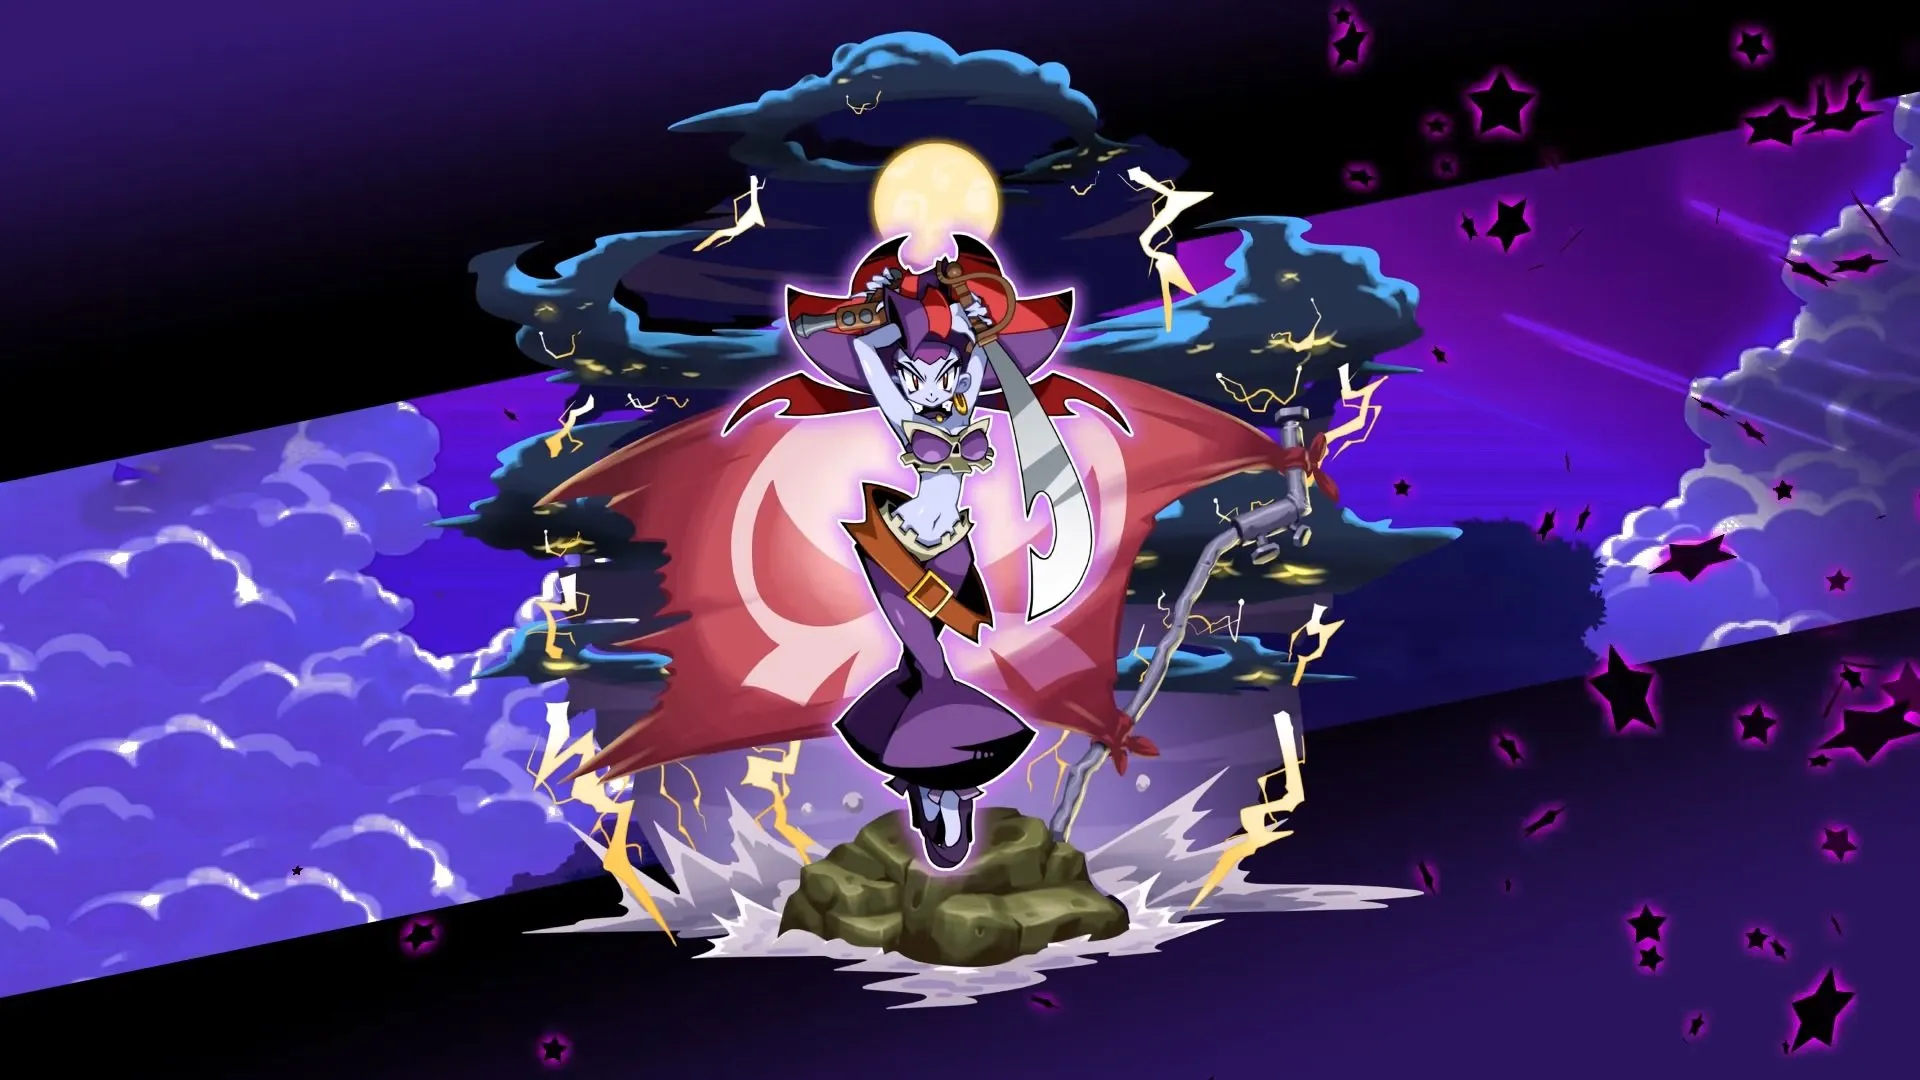 Shantae and the Seven Sirens screenshots, images and pictures - Giant Bomb